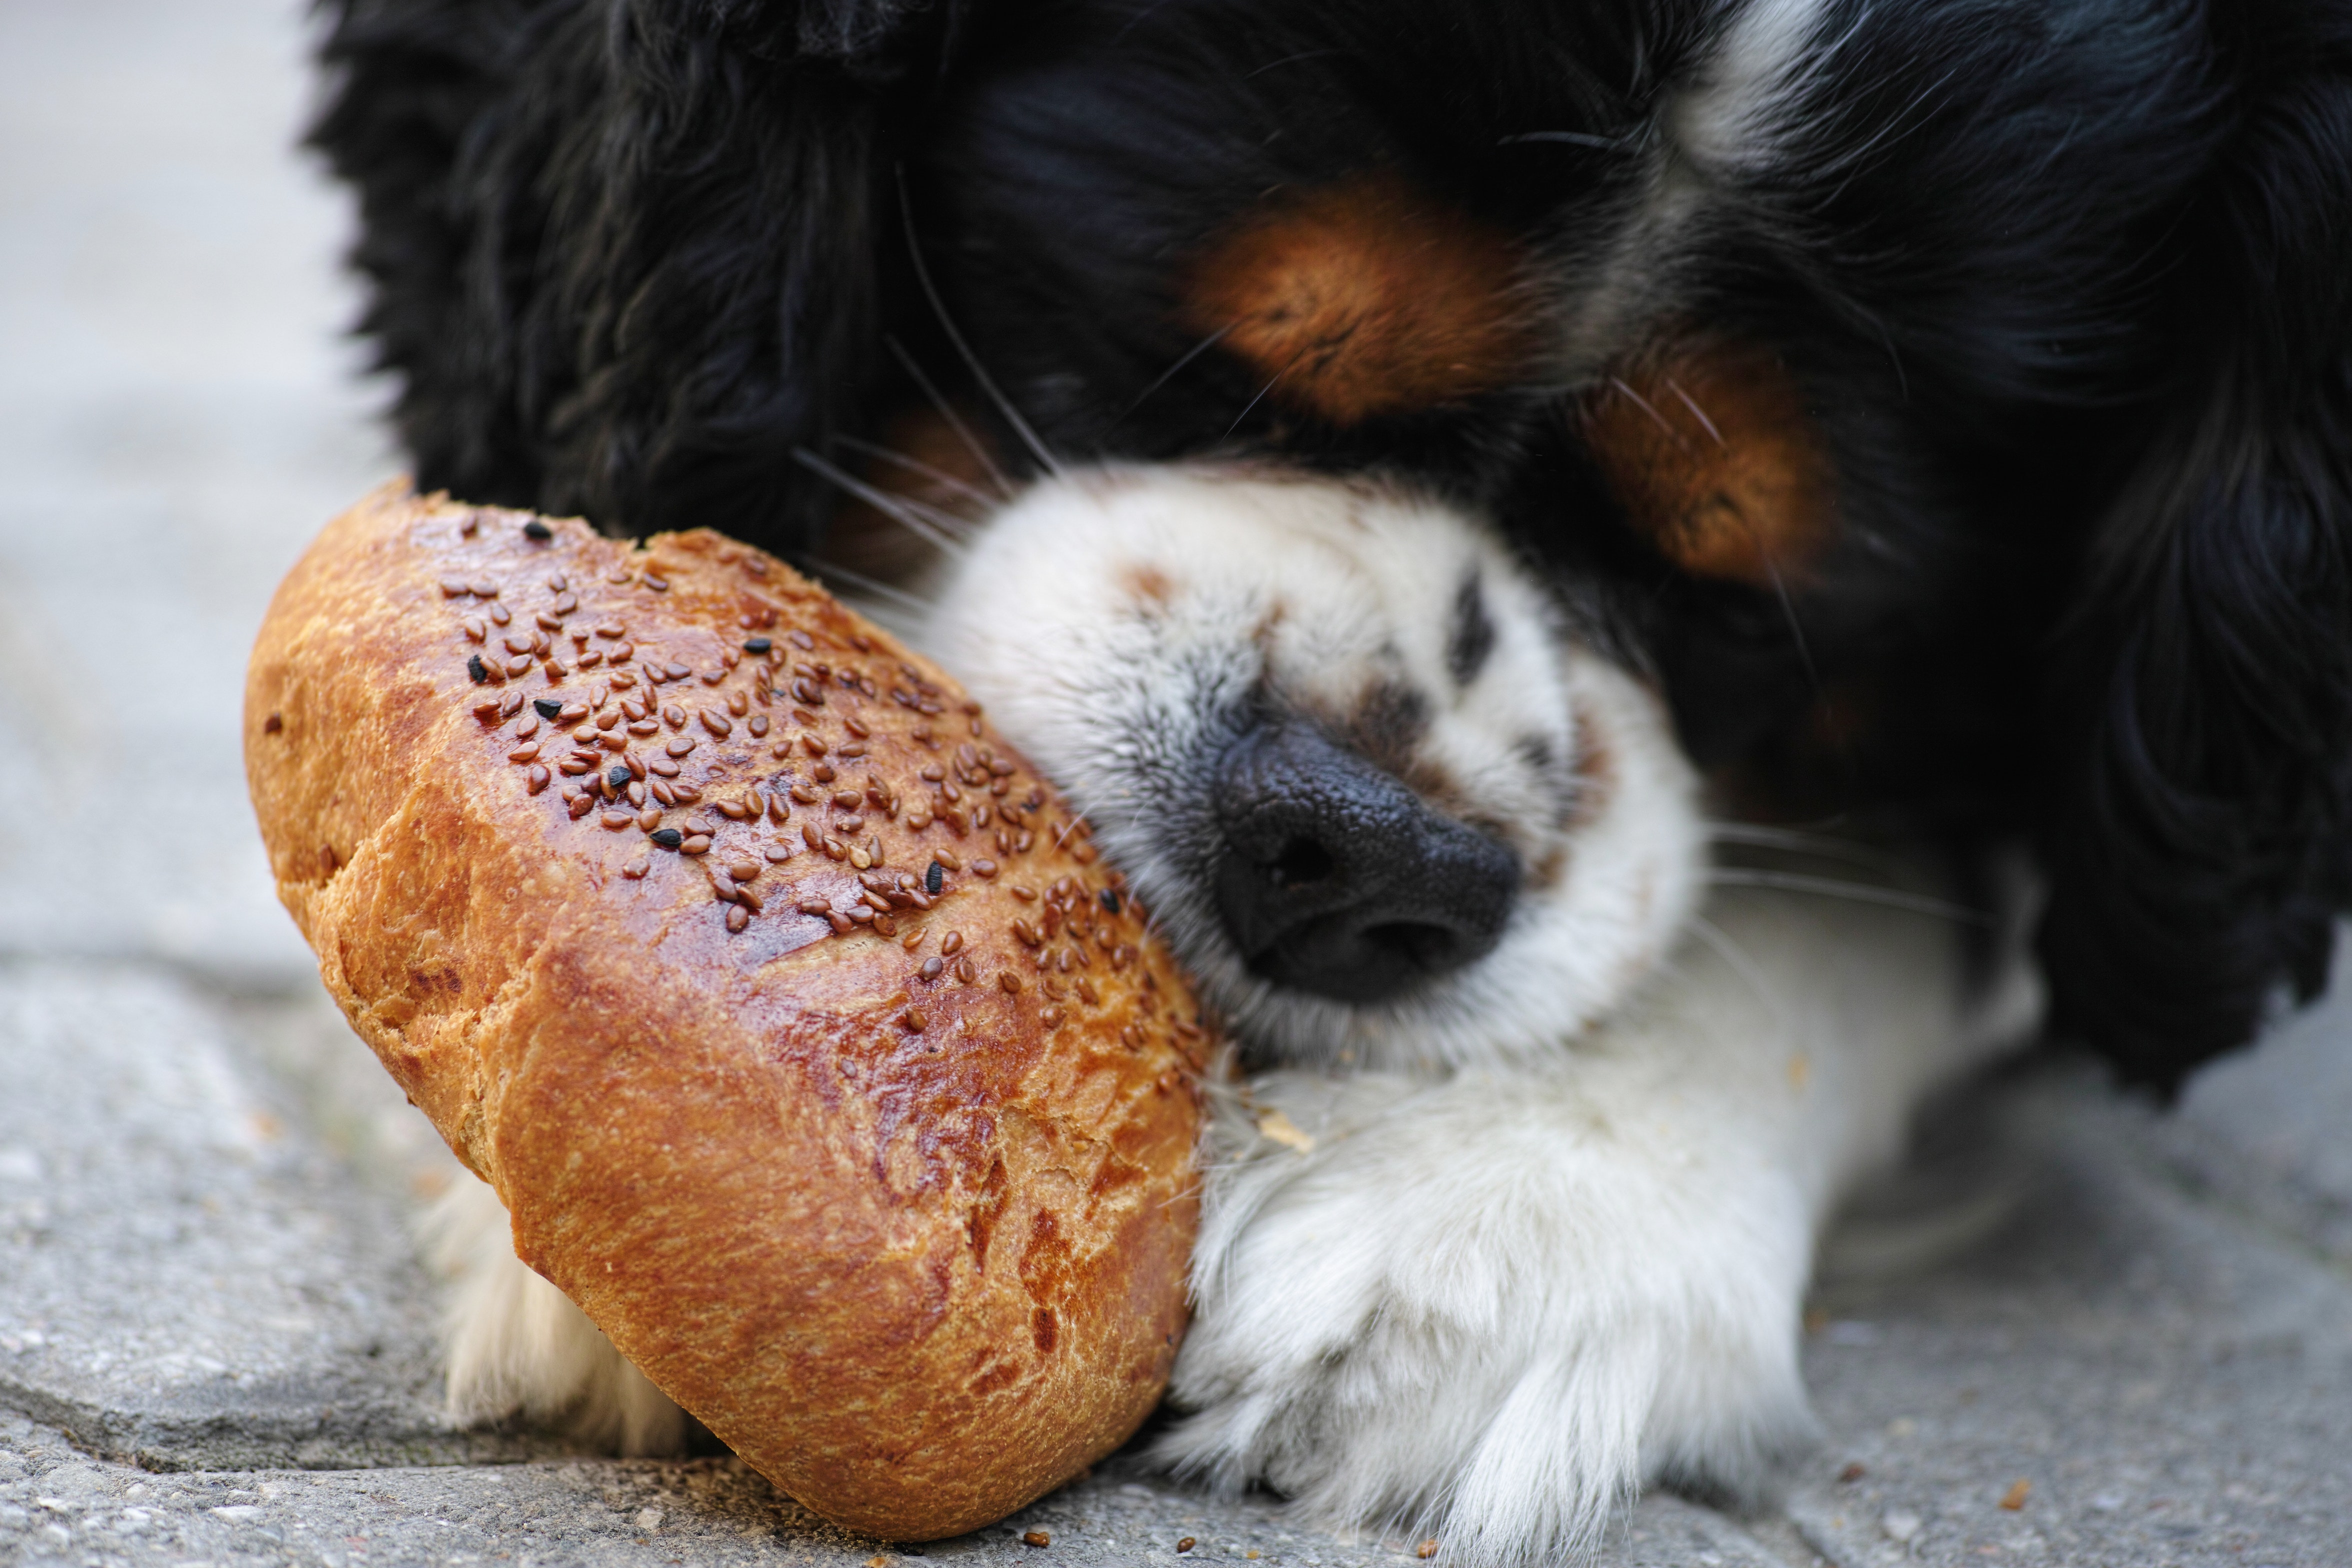 puppy eating bread